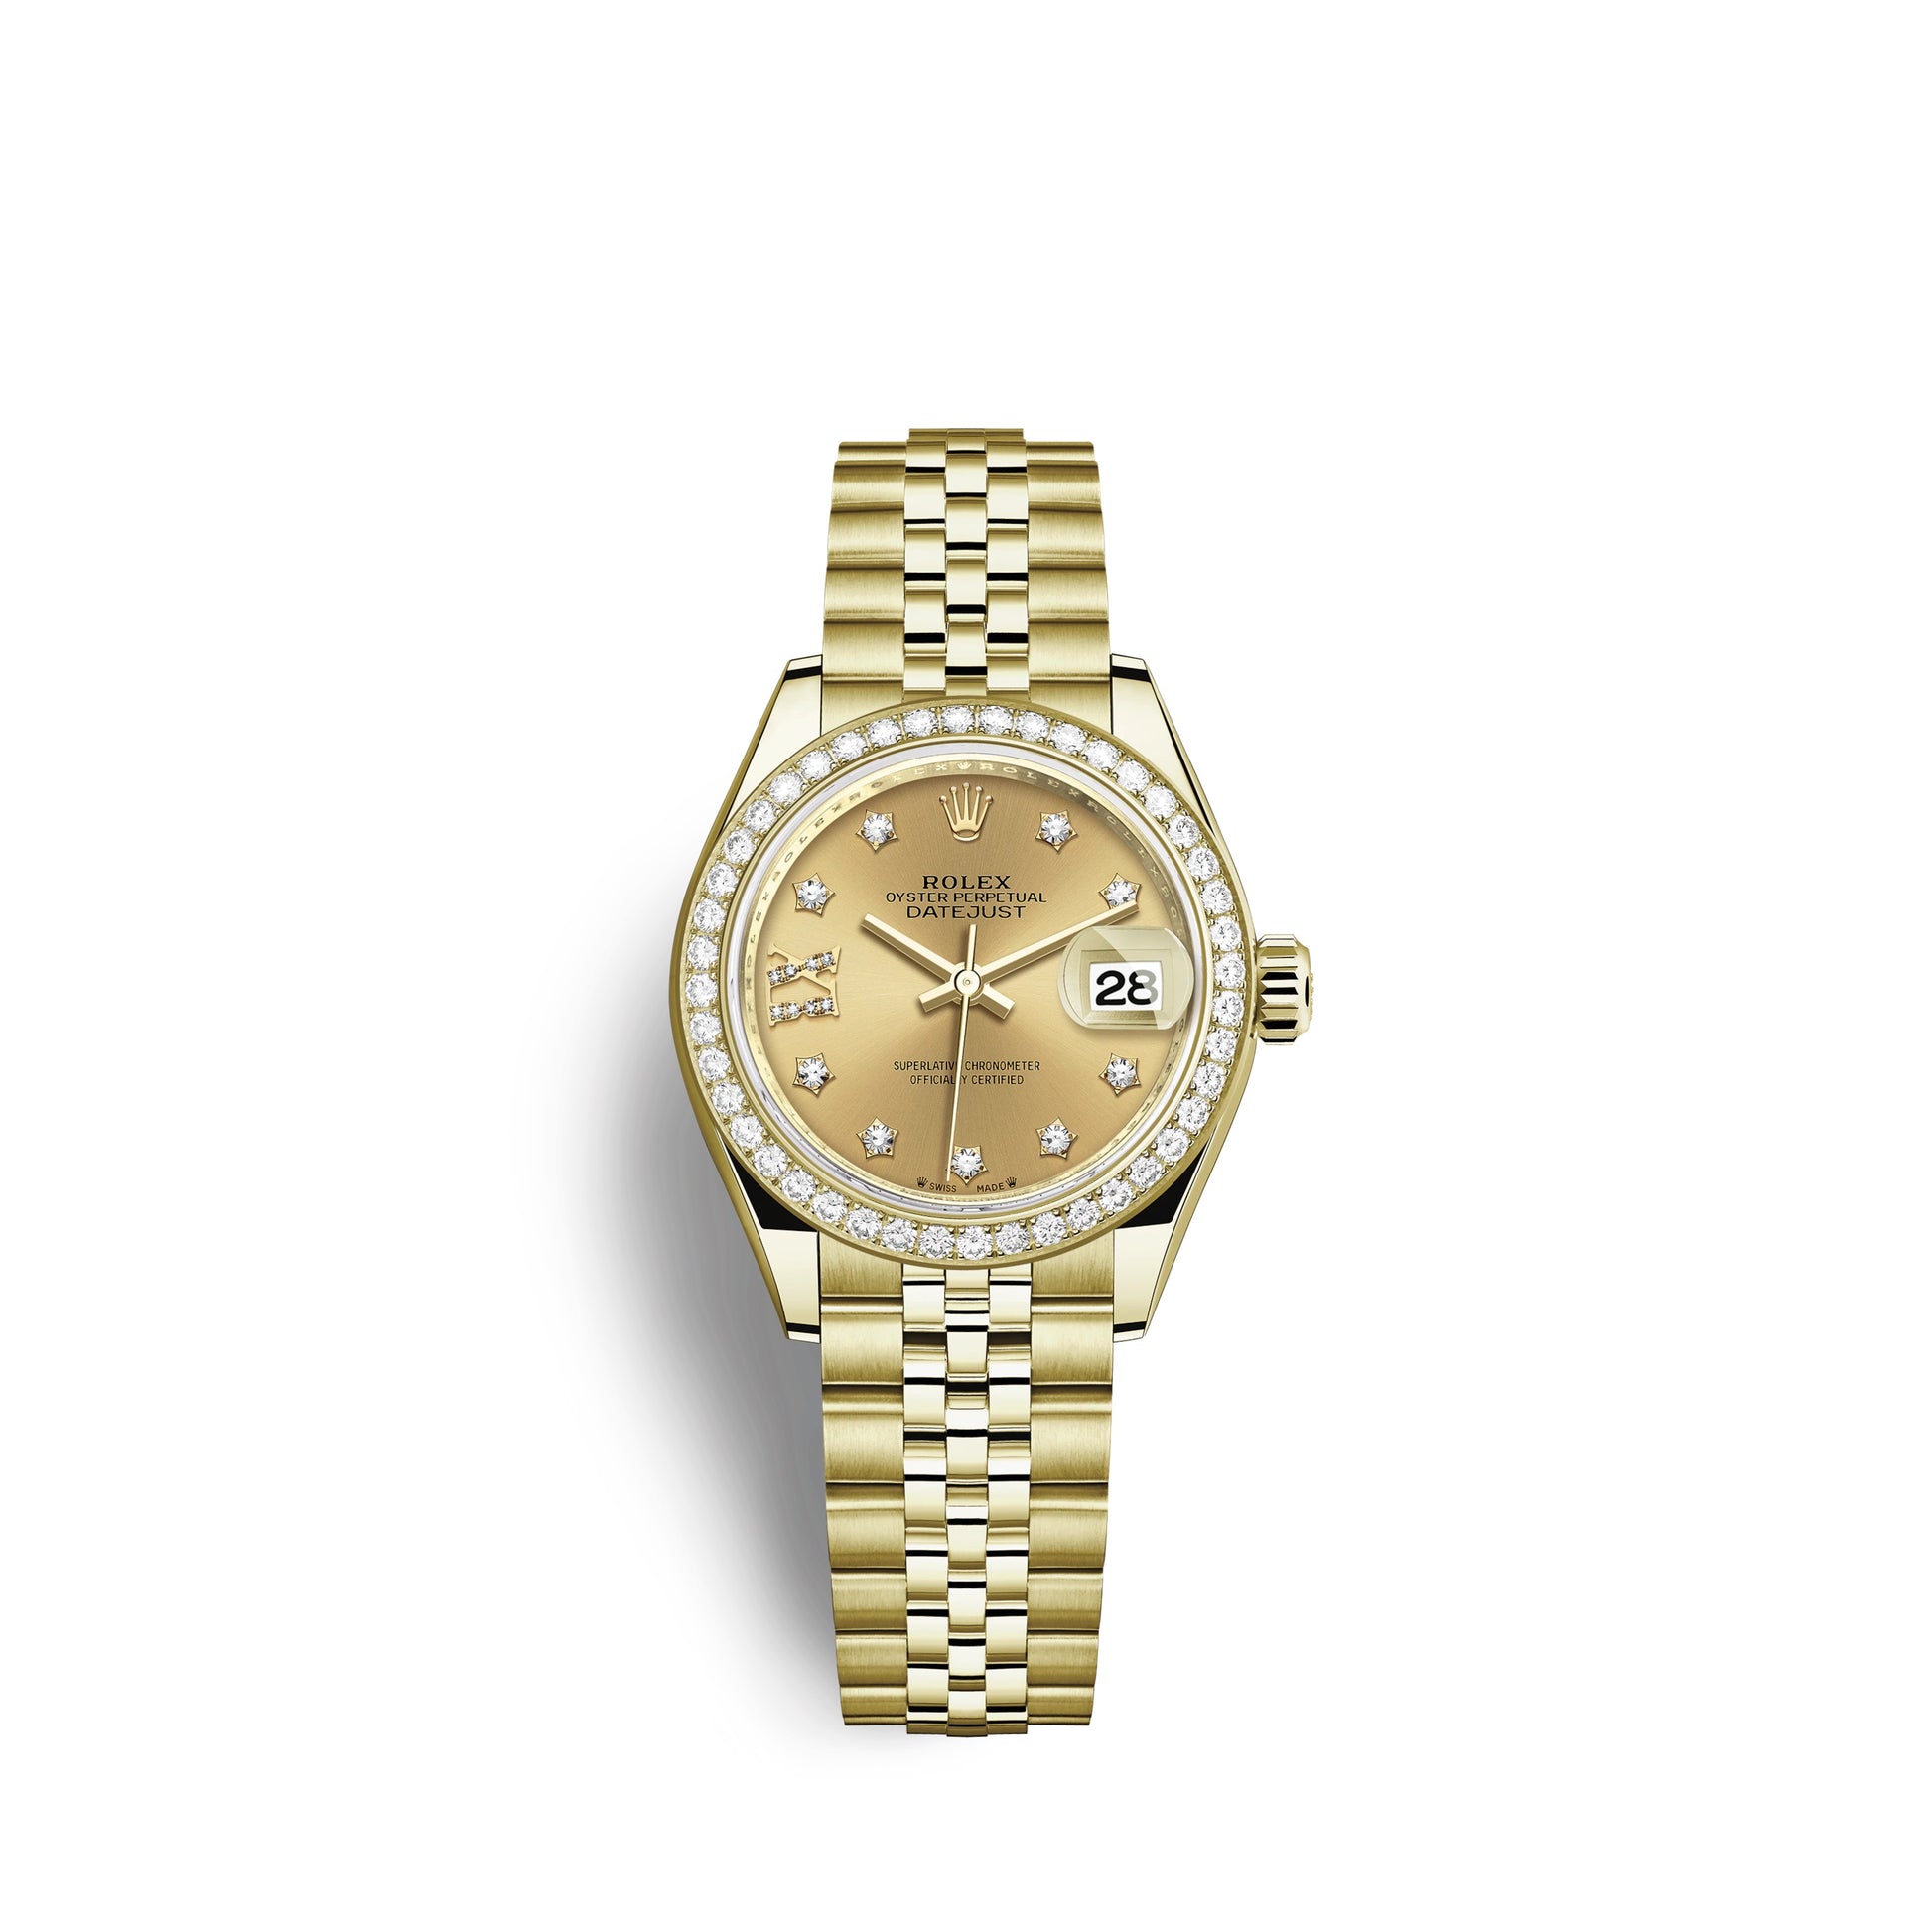 Rolex Lady-Datejust 28, 18kt Yellow Gold and diamonds, Ref# 279138RBR-0007